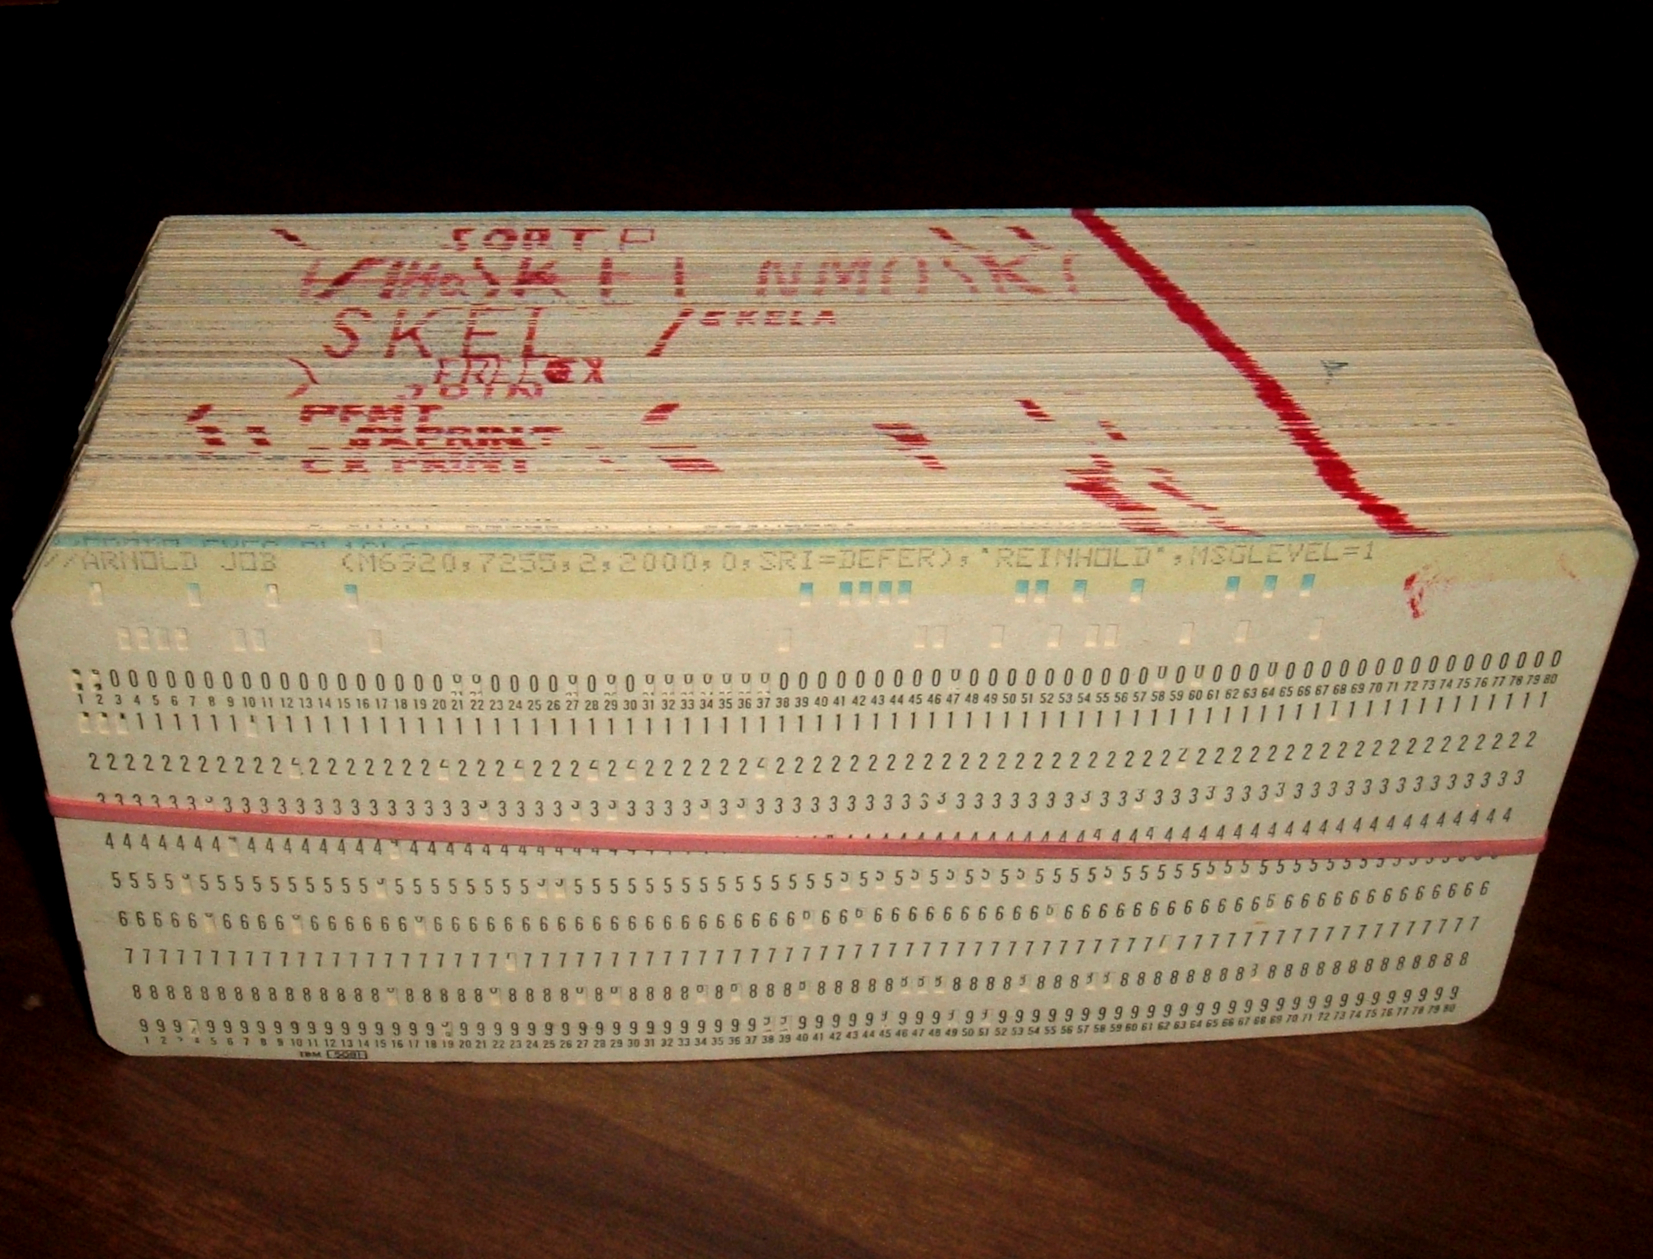 Stack of punch cards held together with a rubber band and marked with a diagonal red line for sorting